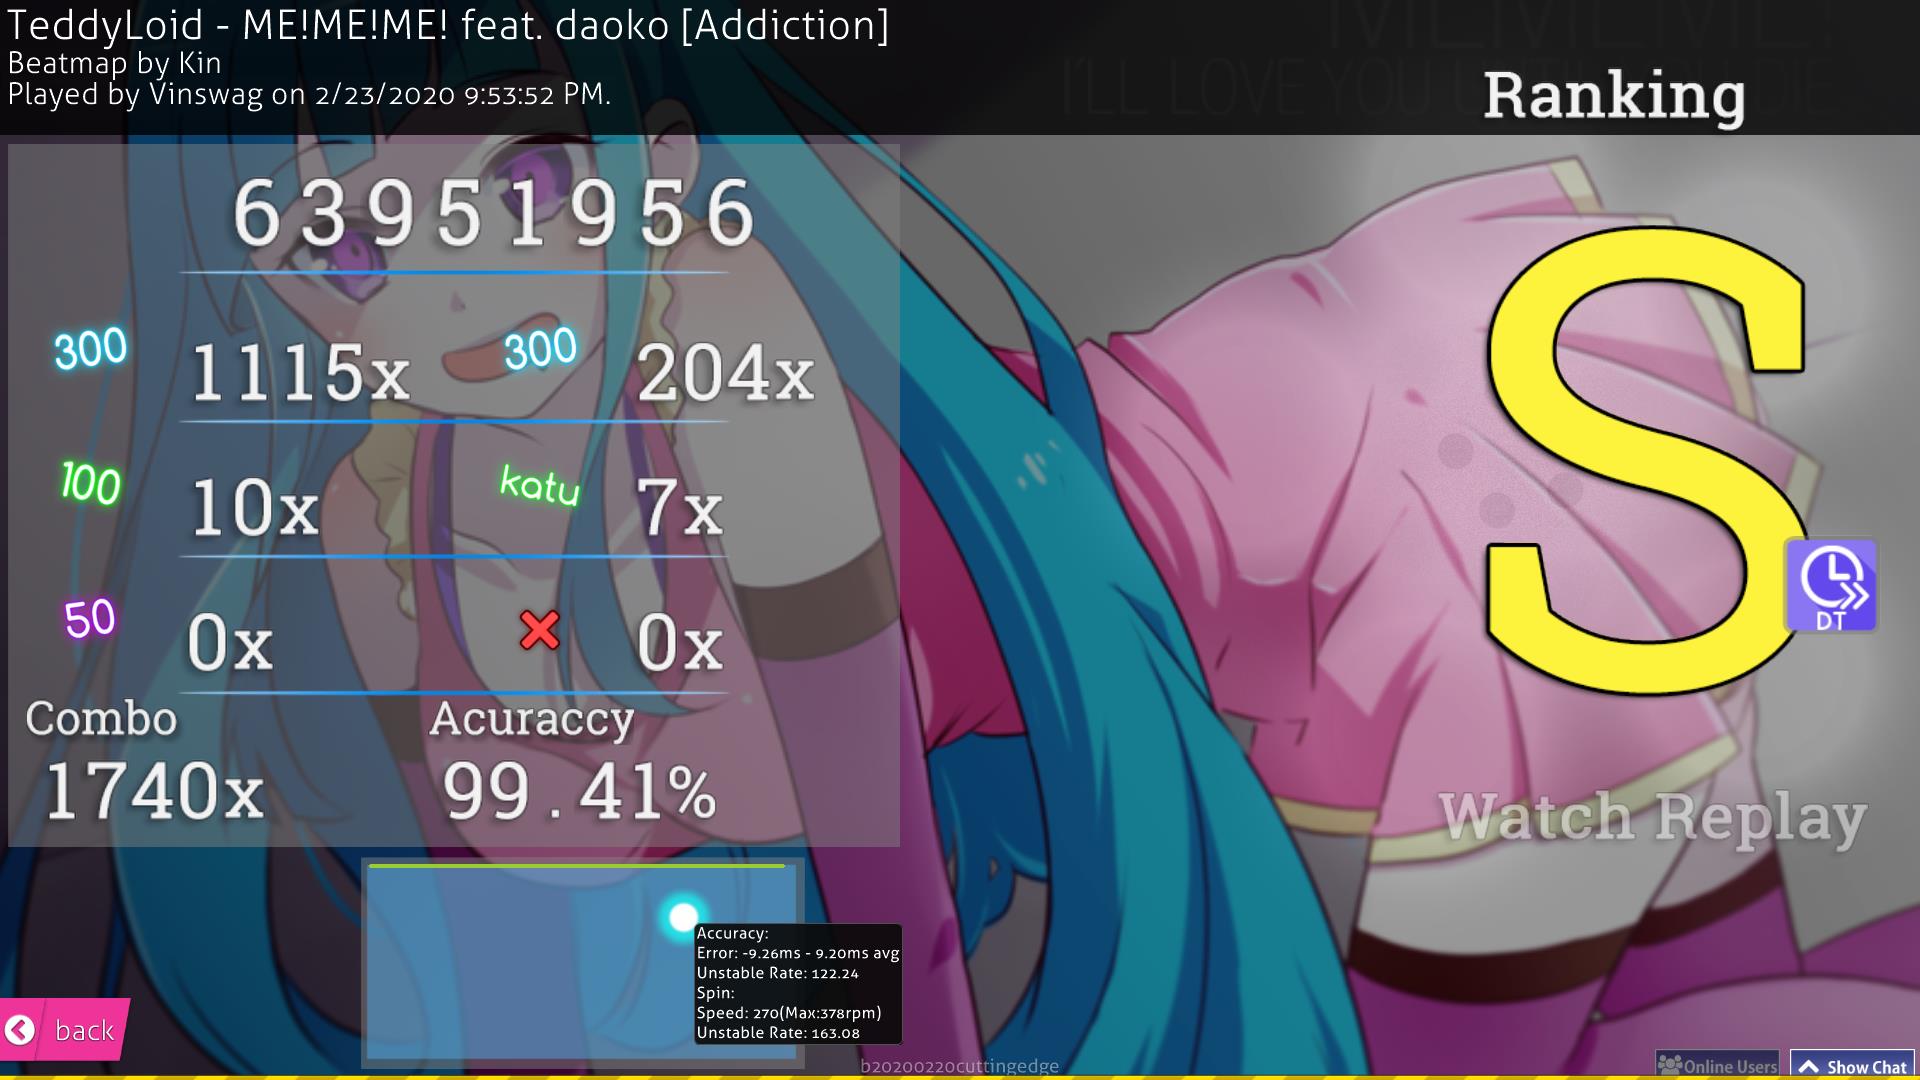 Vinswag Teddyloid Me Me Me Feat Daoko Addiction Dt Mapped By Kin 6 81 99 41 Fc 2 449pp 81 49 Cv Ur 1st Dt Only Fc This Play Is Cracked What The Hell Osugame